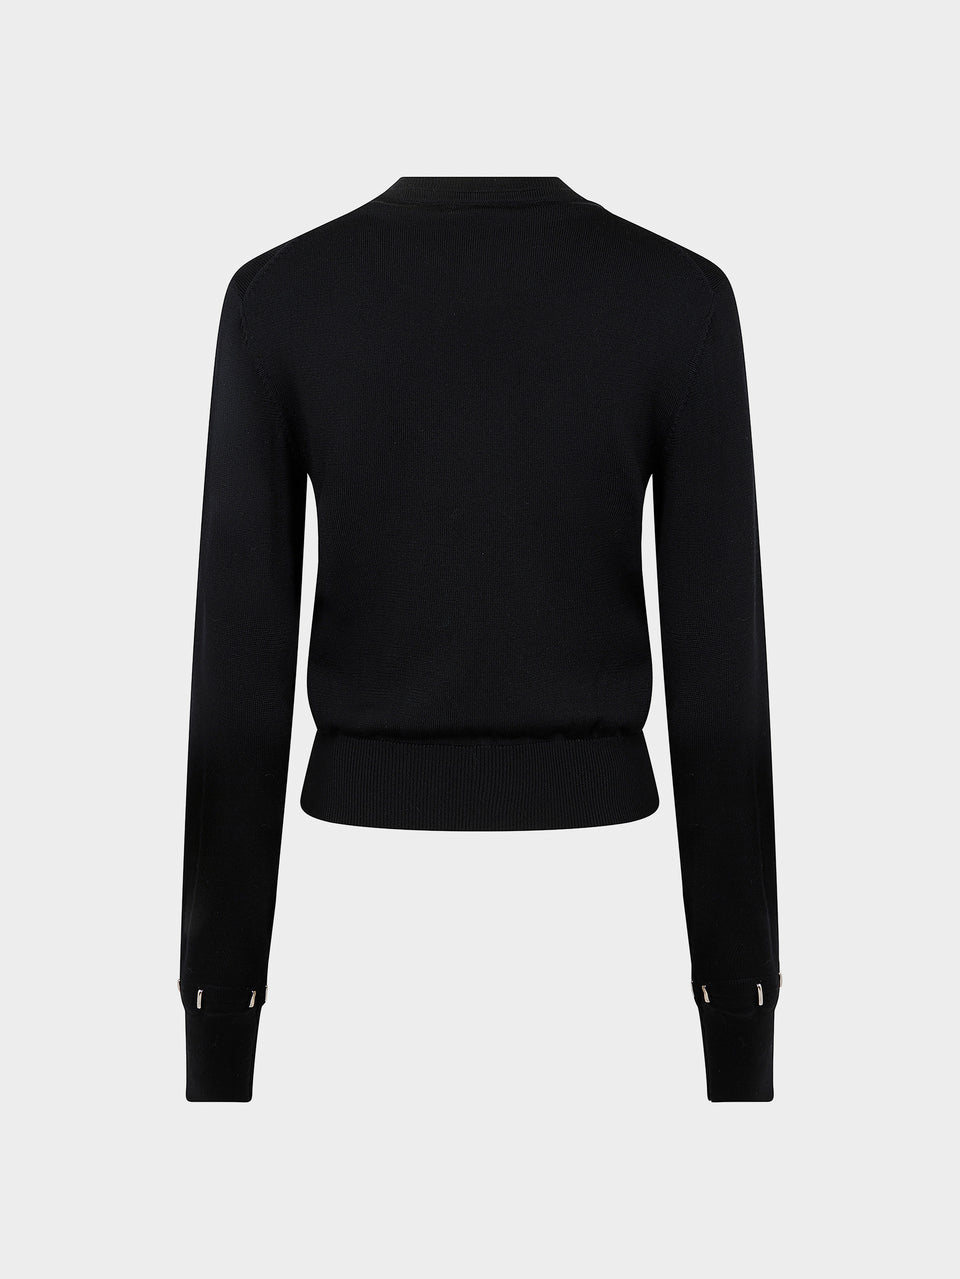 Black sweater with metallic details